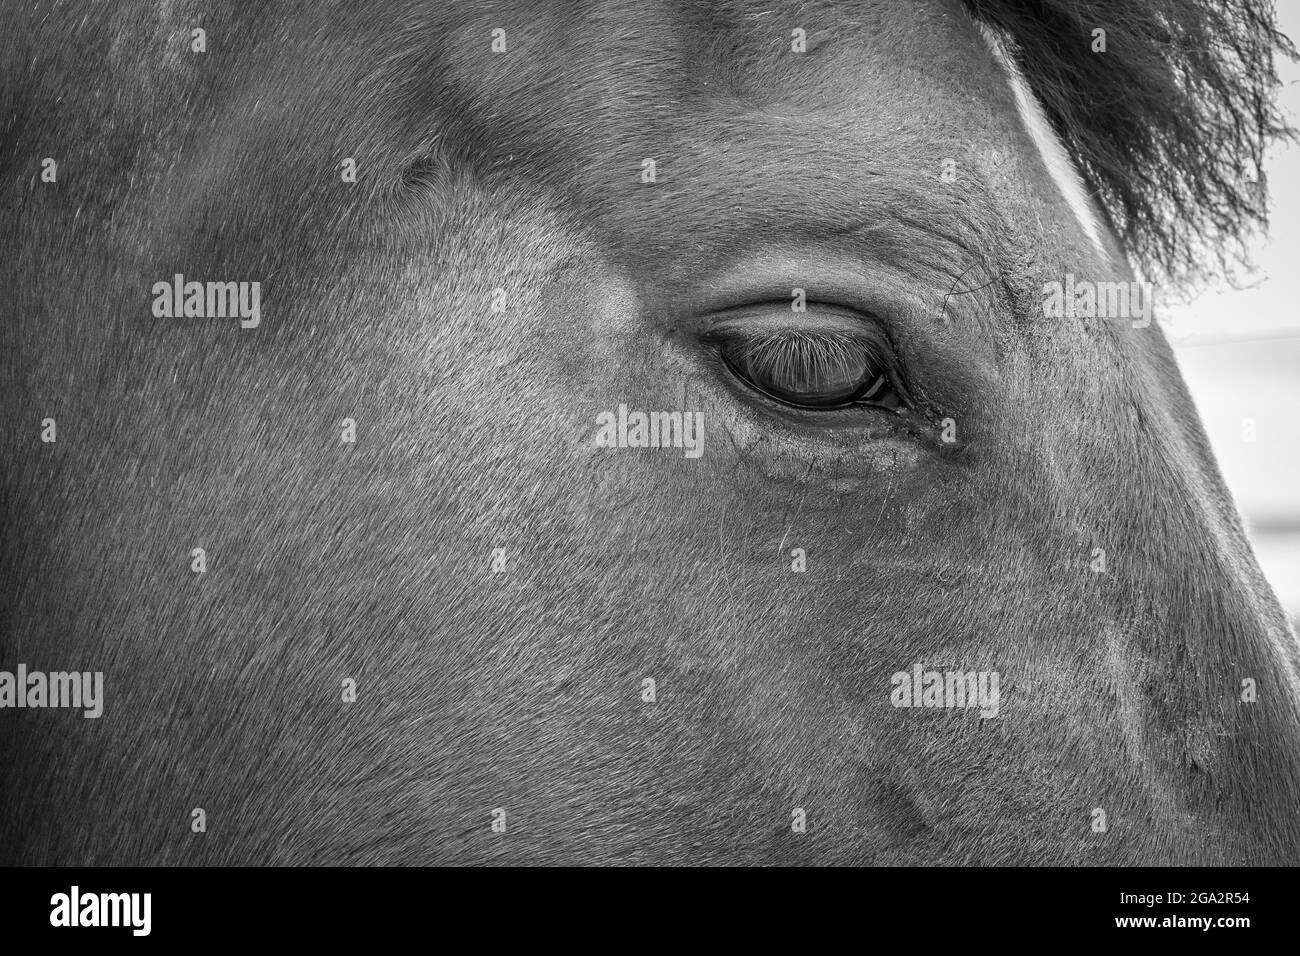 Detail close-up of a horses head showing an eye. Stock Photo